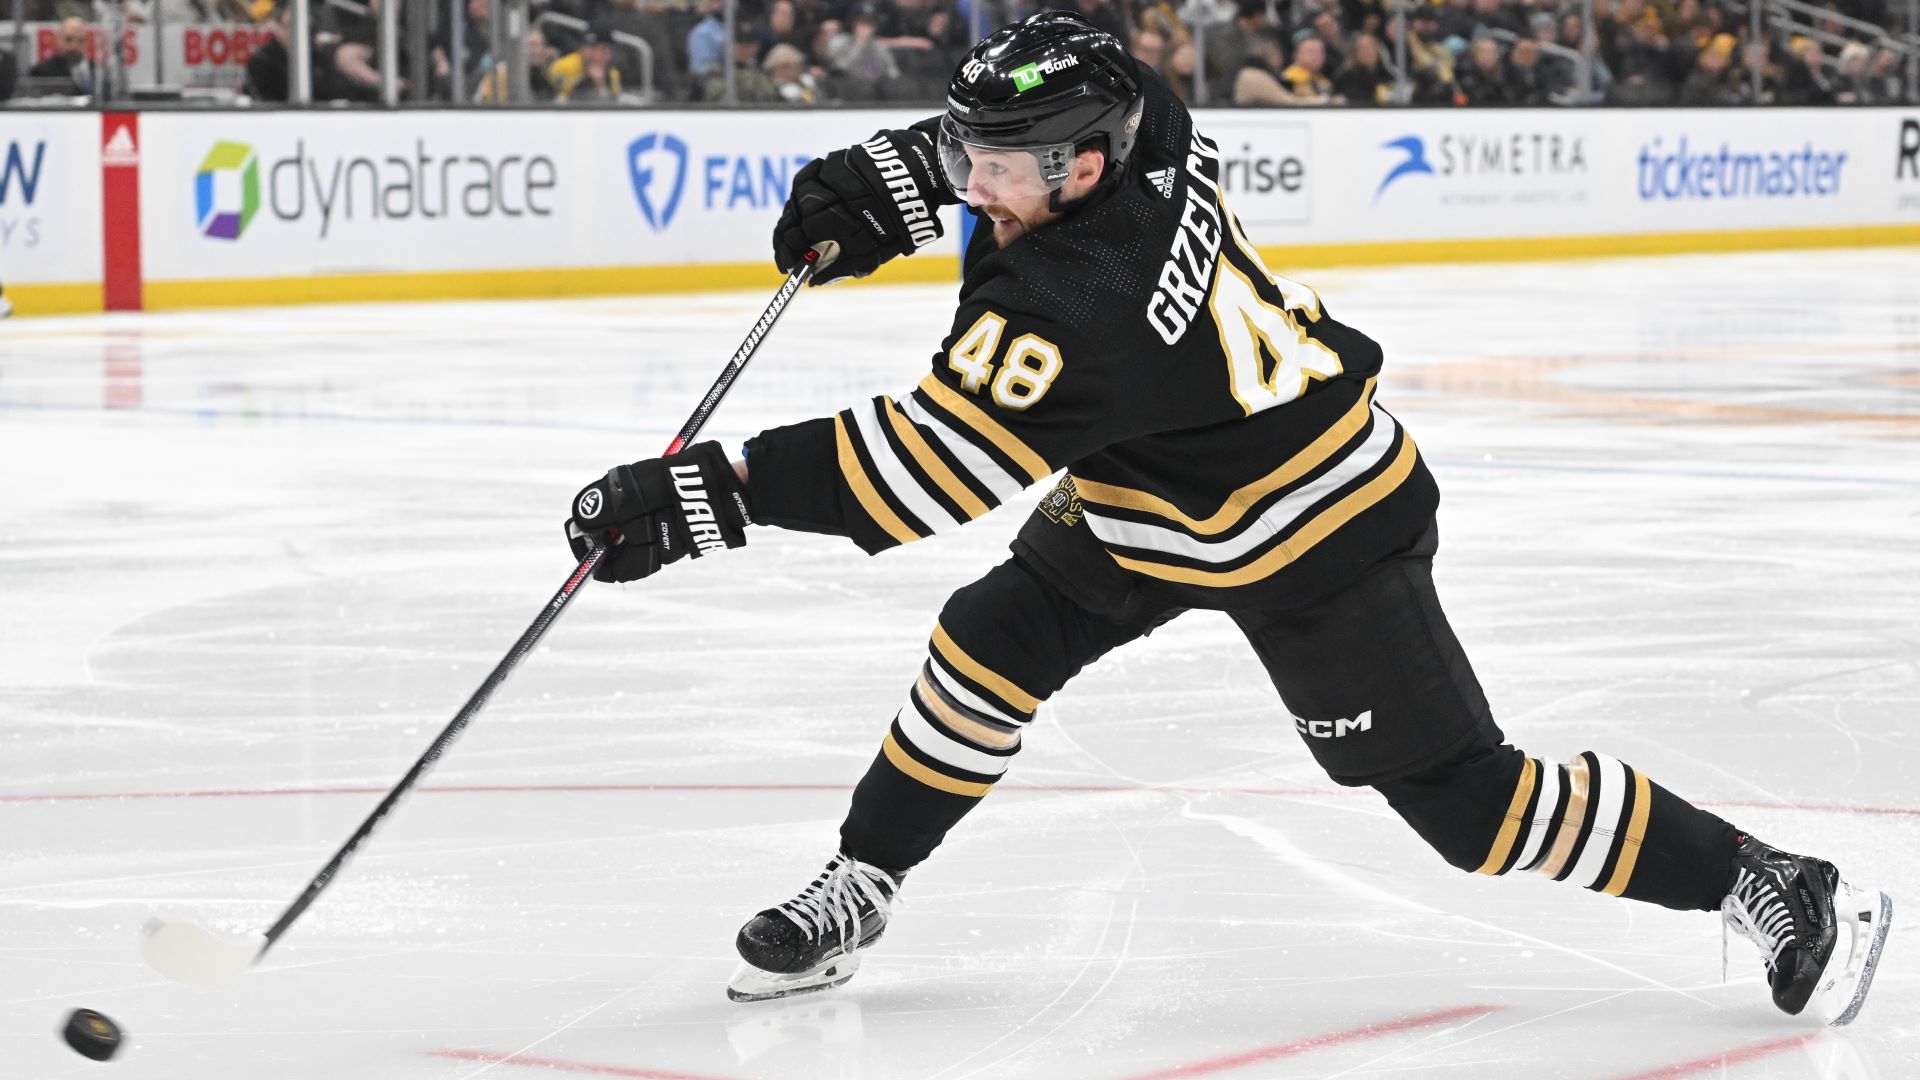 Bruins Players Reveal Injuries After Postseason Run Concludes